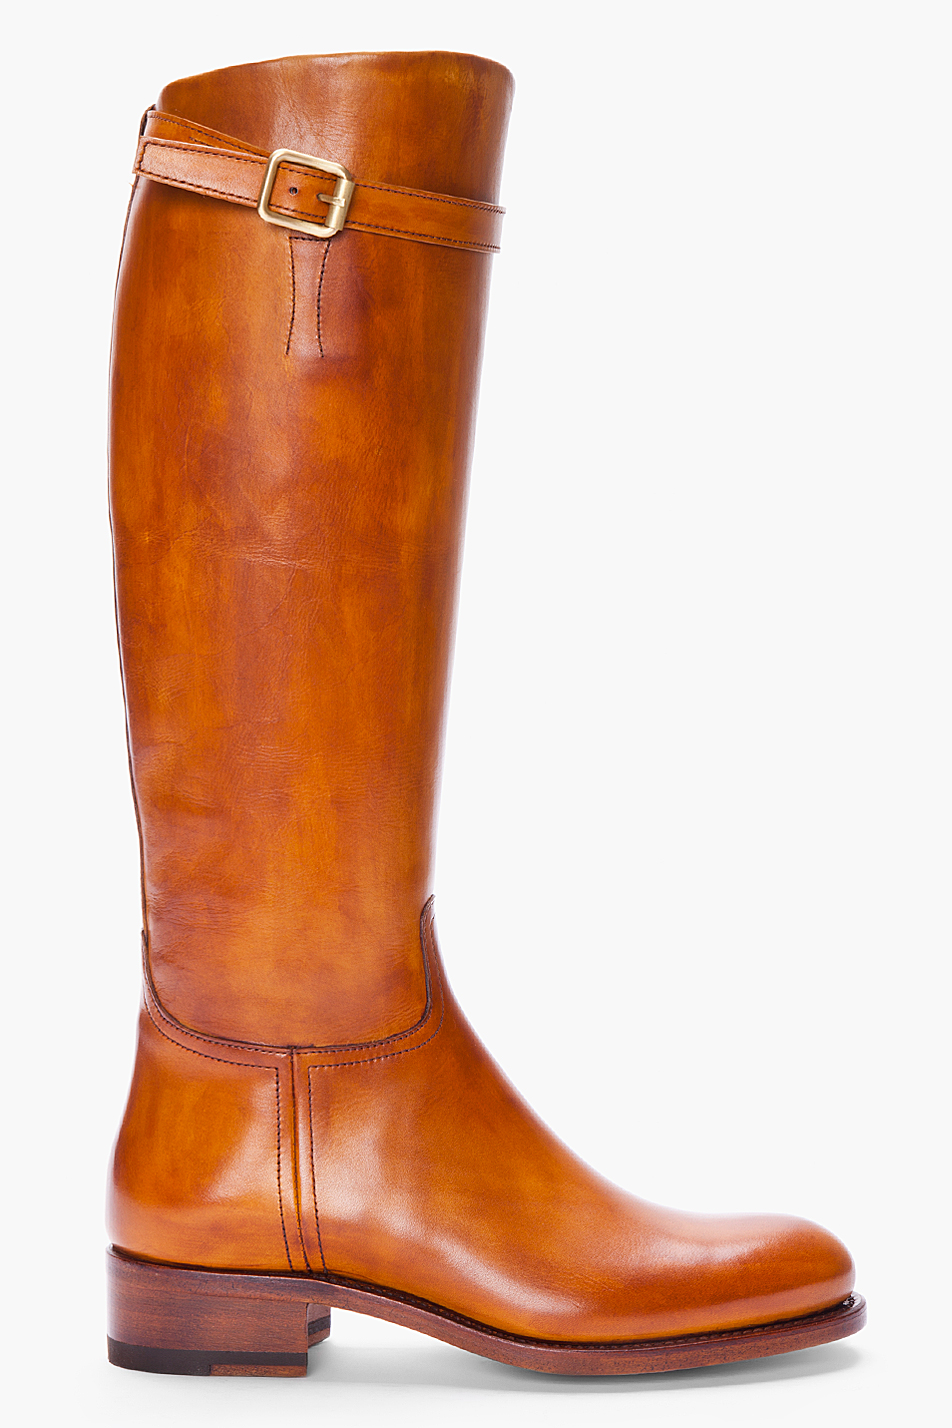 Lyst - Rupert Sanderson Tan Leather Vermont Riding Boots in Brown